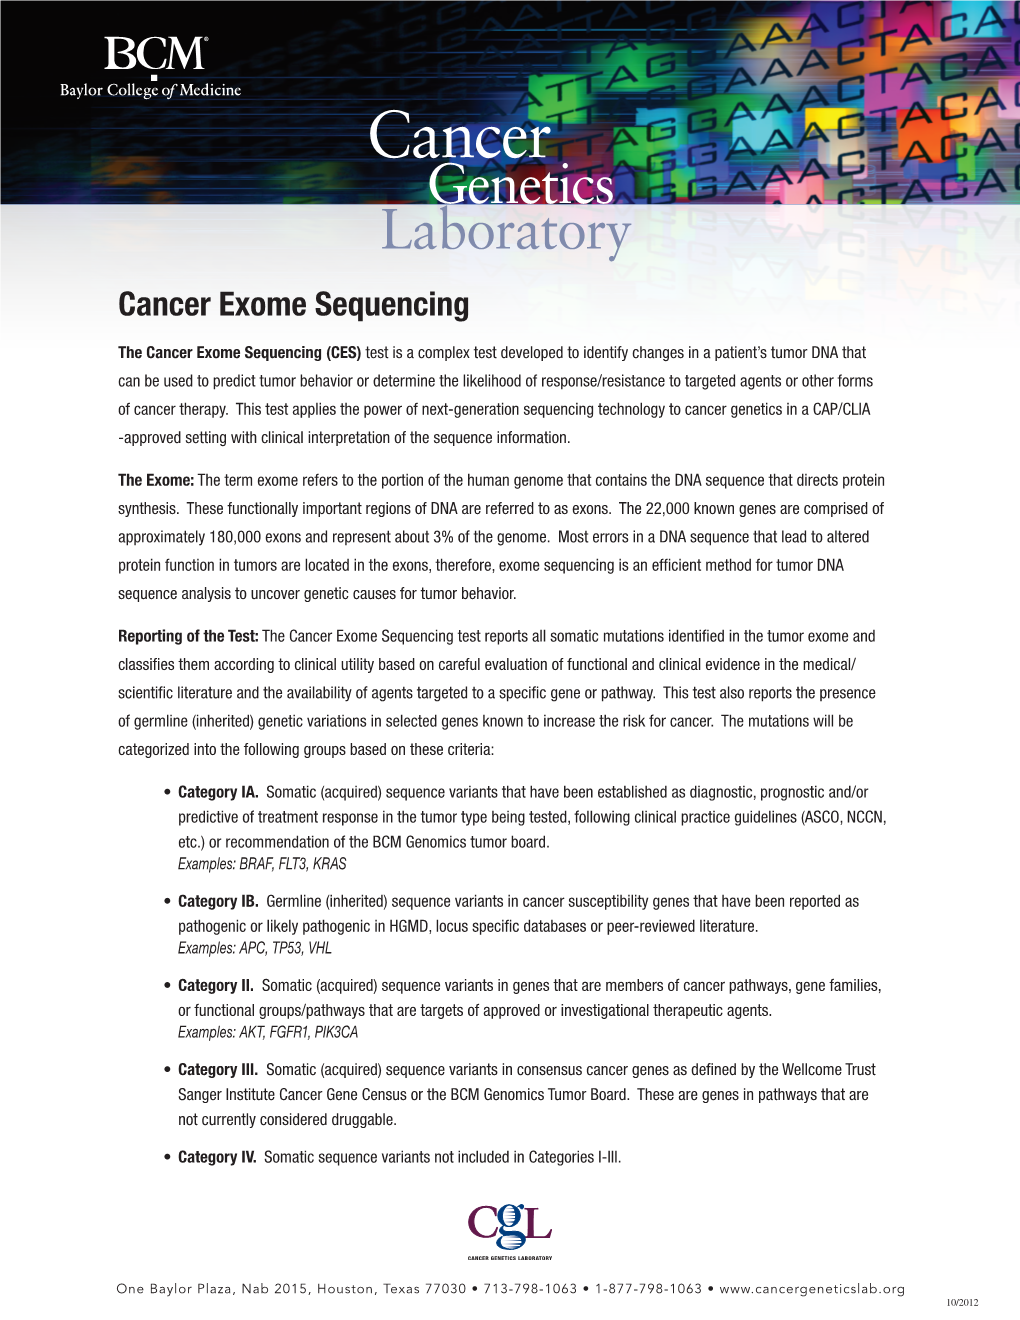 Cancer Exome Sequencing